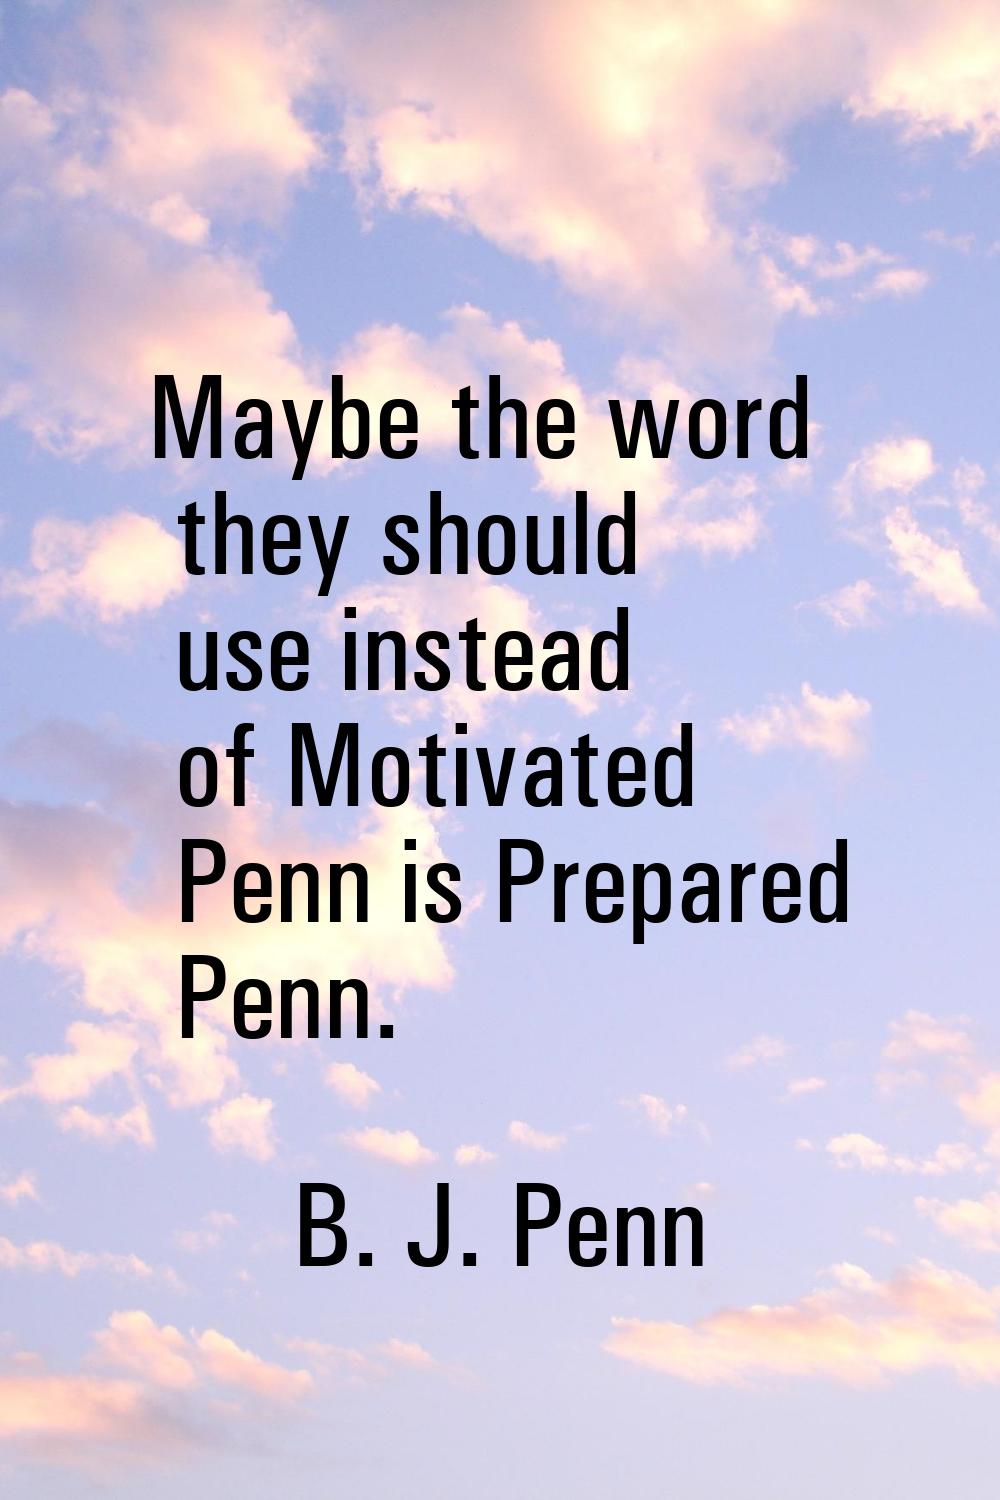 Maybe the word they should use instead of Motivated Penn is Prepared Penn.